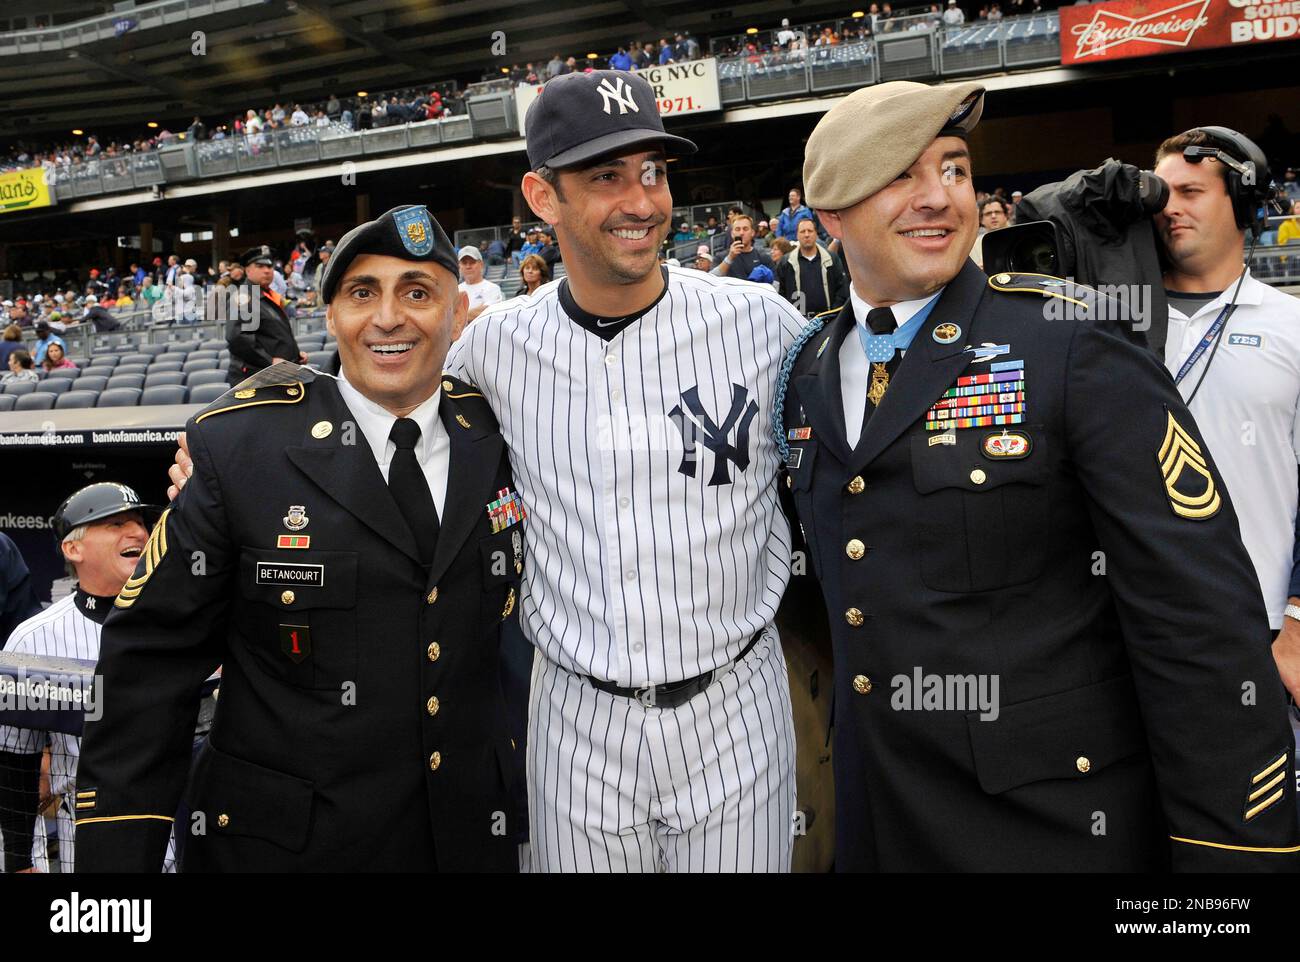 Congressional Medal of Honor awardee Sgt. 1st Class Leroy Arthur Petry  during ceremonies to honor the 10-year anniversary of September 11, 2001  before the baseball game between the Yankees and the Baltimore